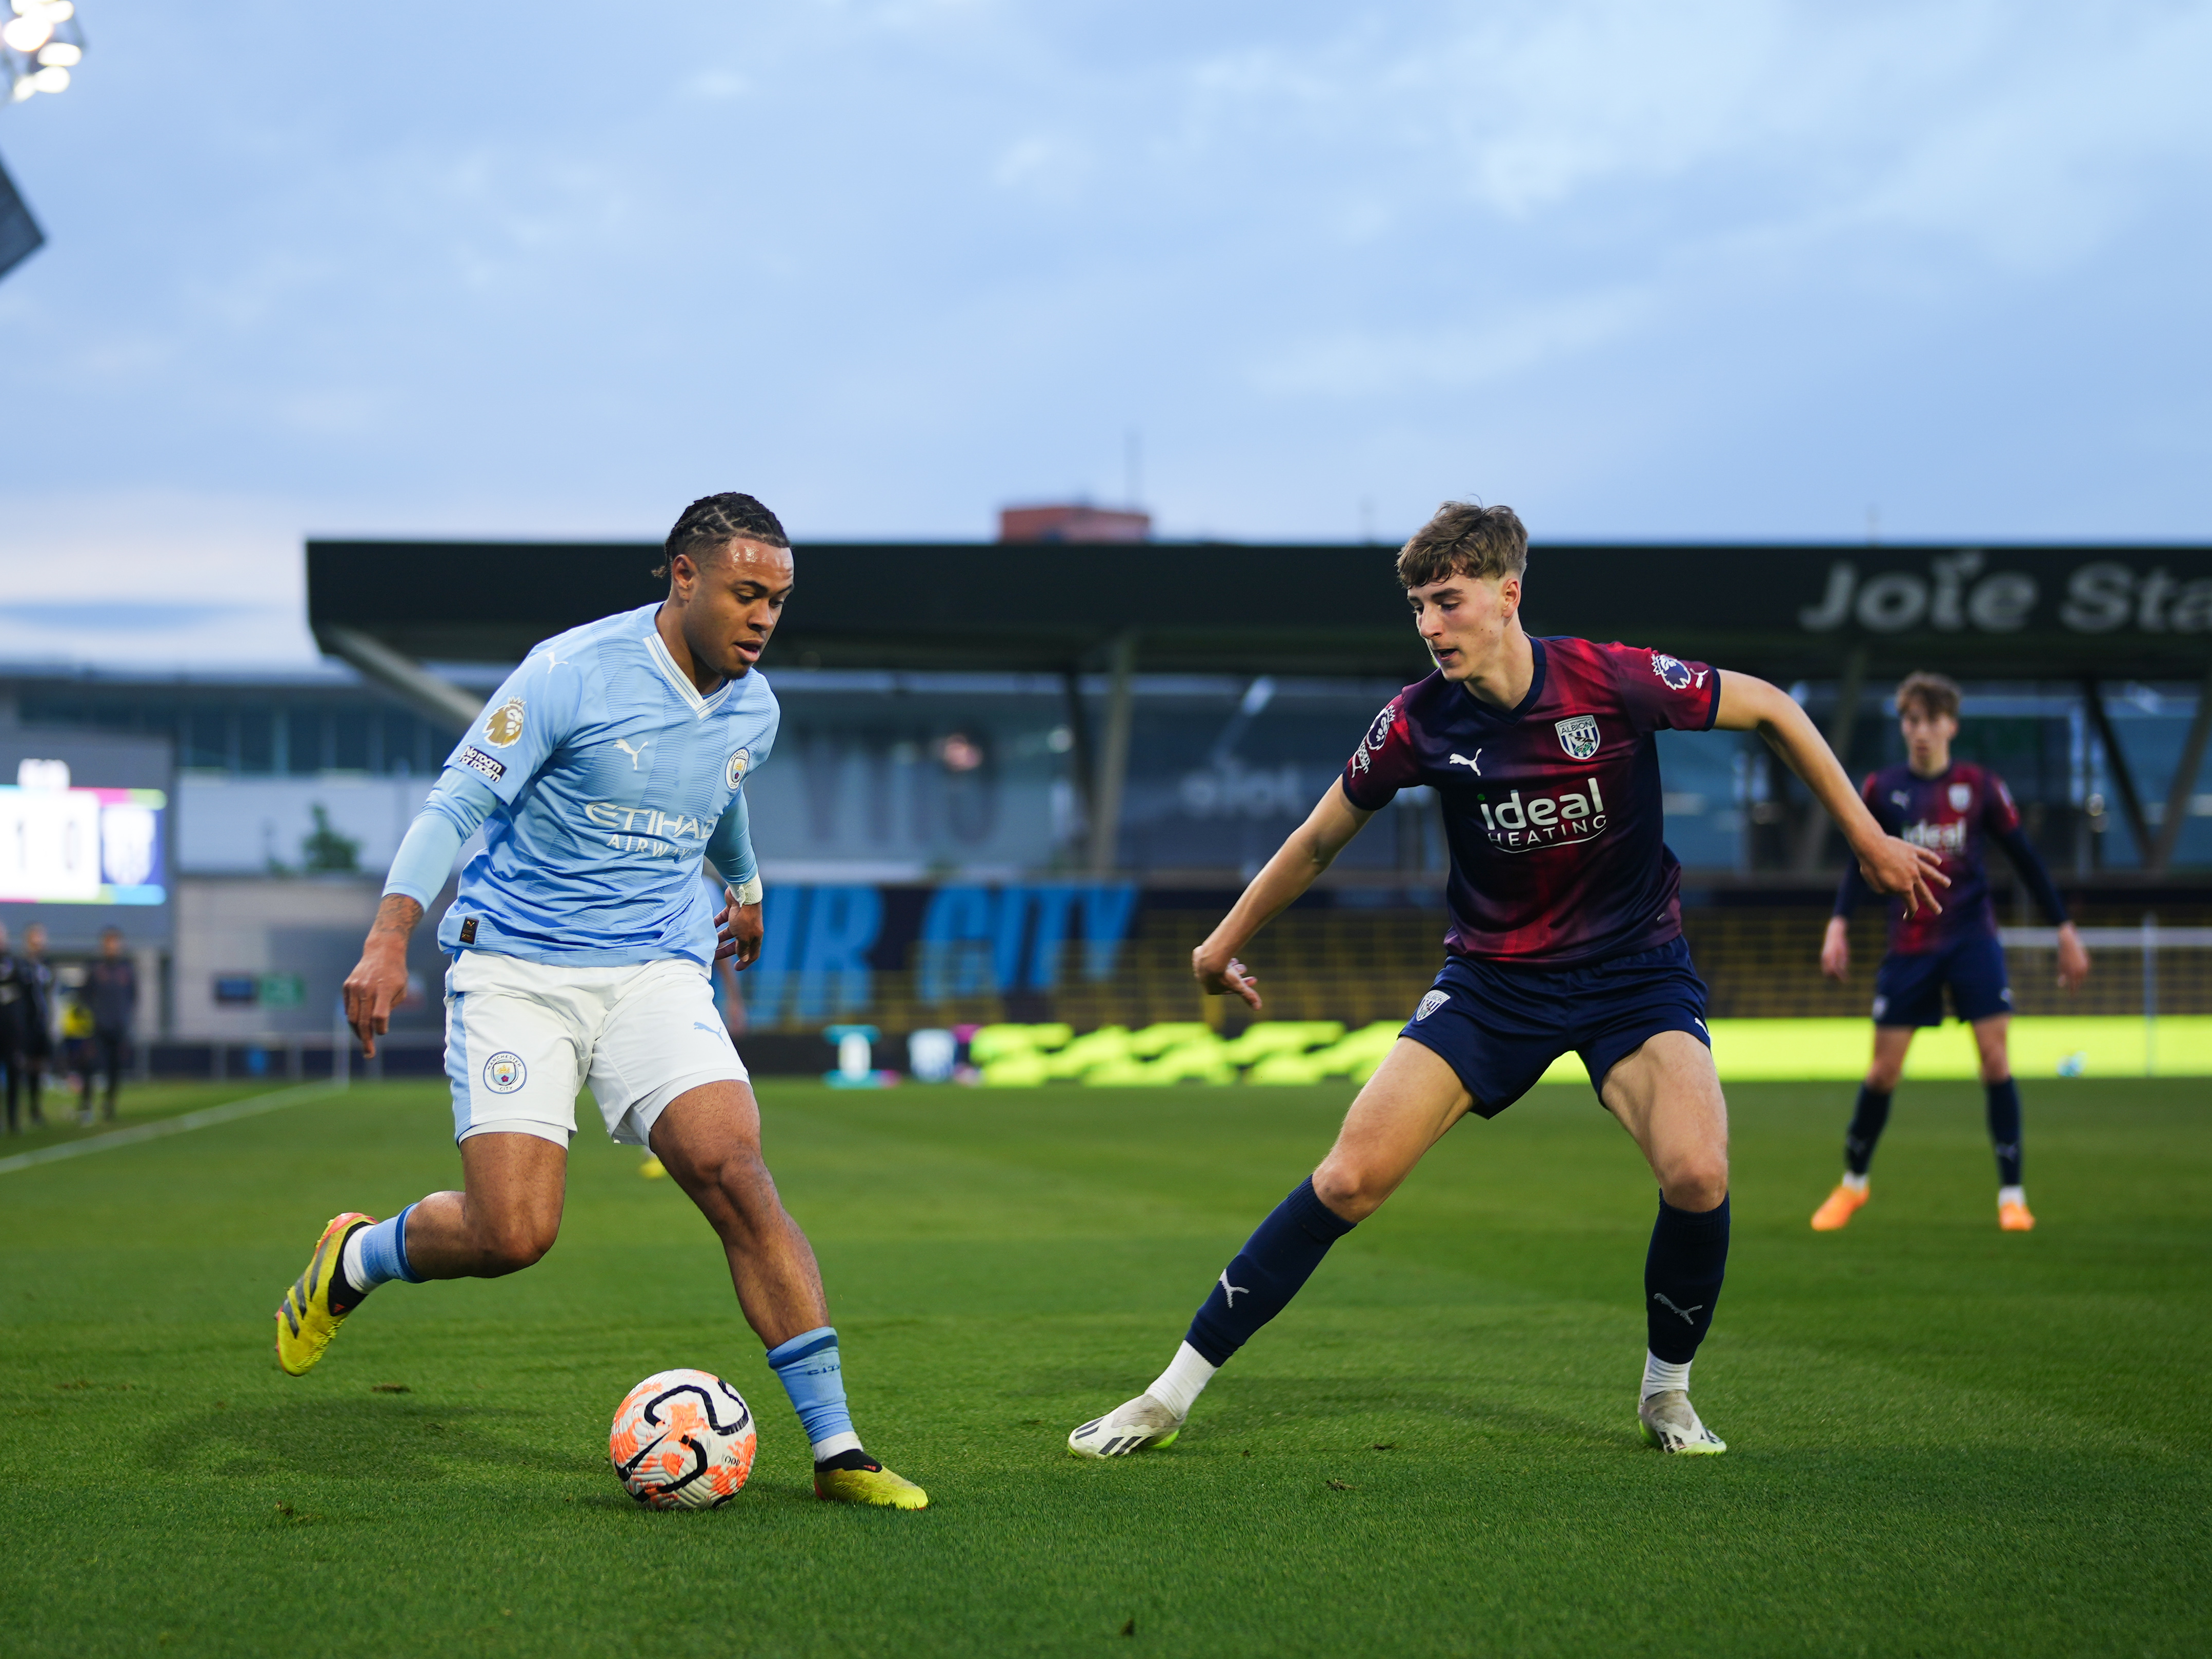 A photo of Josh Shaw, in the red and blue 23/24 away kit, in action in the PL2 v Man City